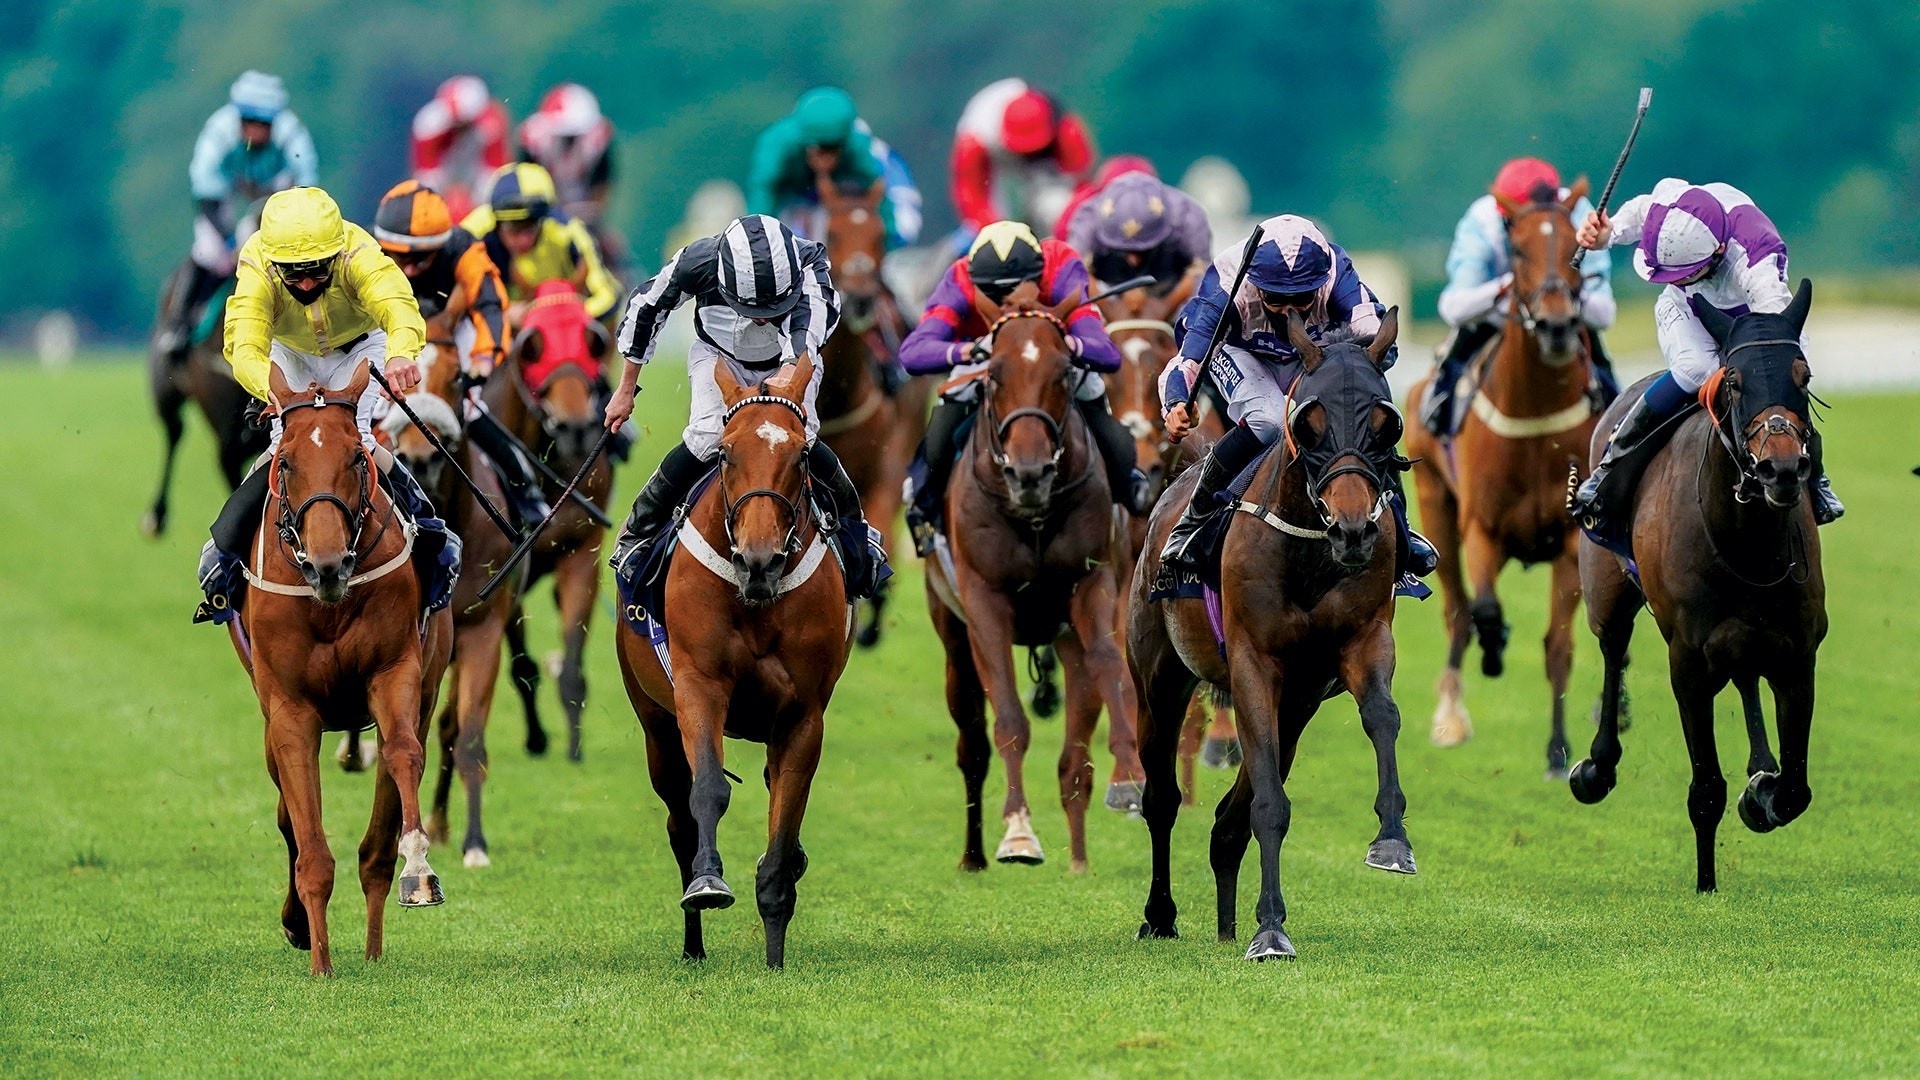 Horse Racing, Exciting racehorses, Derby drama, Equestrian competition, 1920x1080 Full HD Desktop